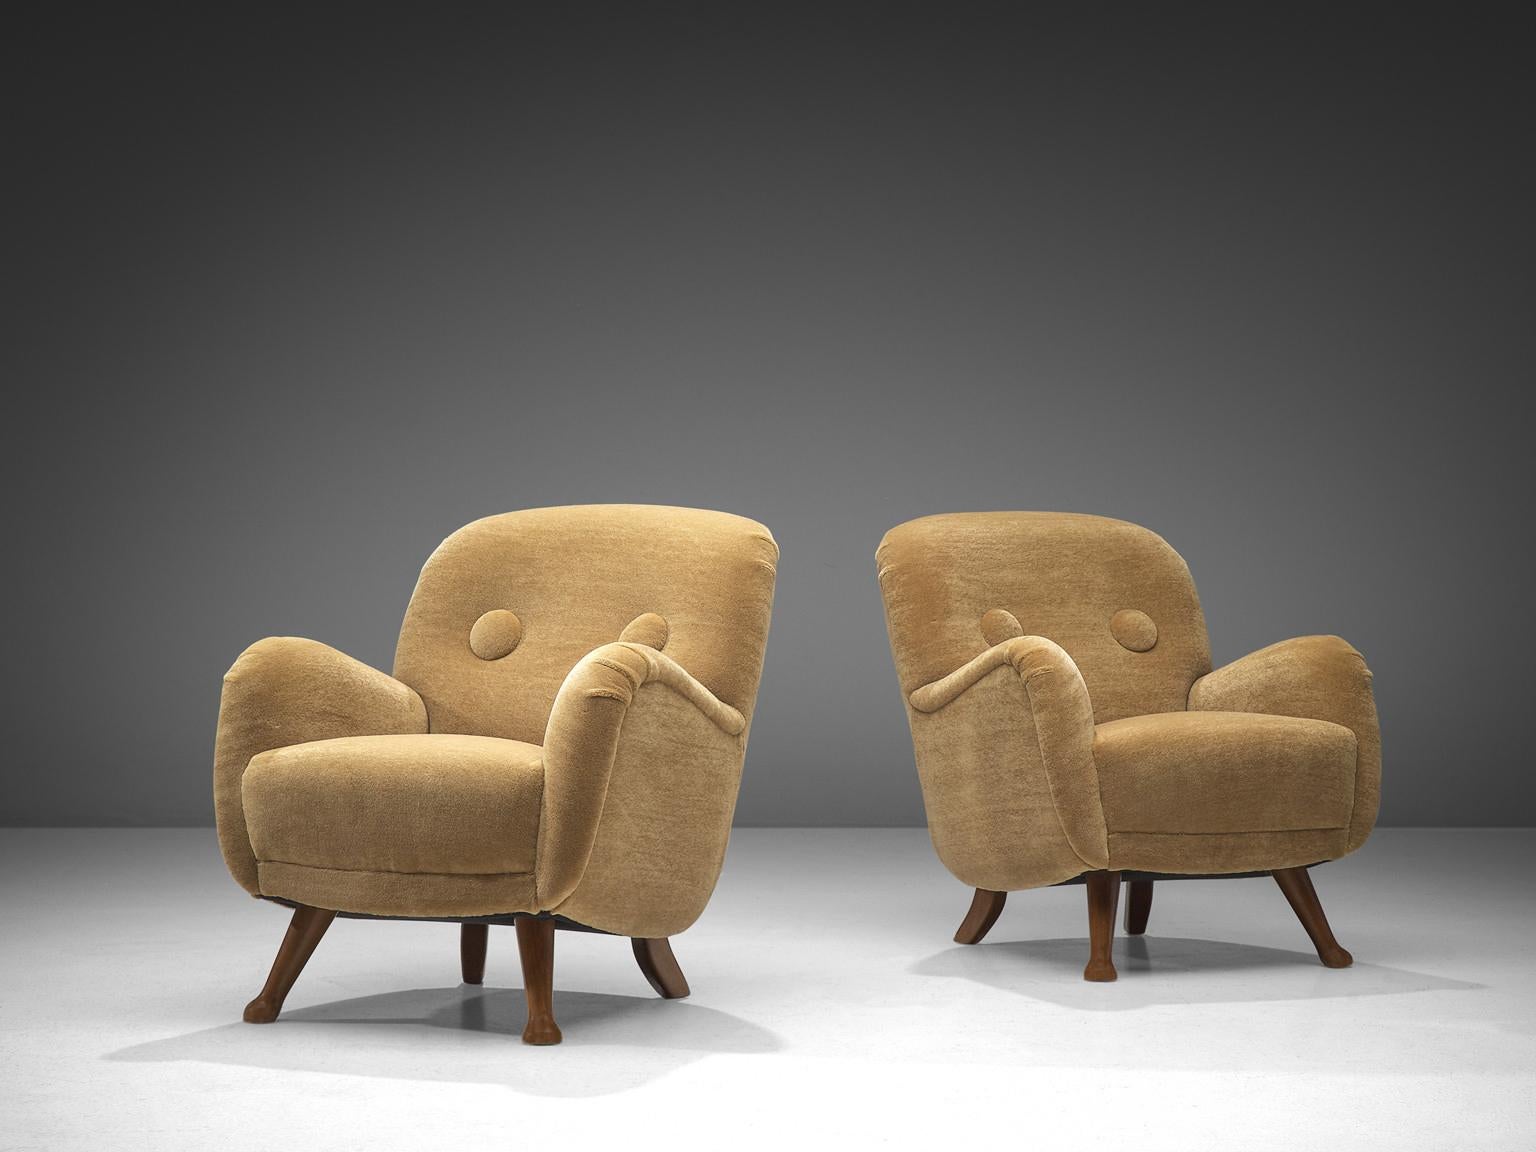 Berga Mobler, pair of armchairs, beige teddy fabric, beech, Denmark, 1940s

This bold and curvy armchair is based on a solid construction with a tender touch due to the soft texture of the teddy fabric. The whole shell is slightly tilted backwards.